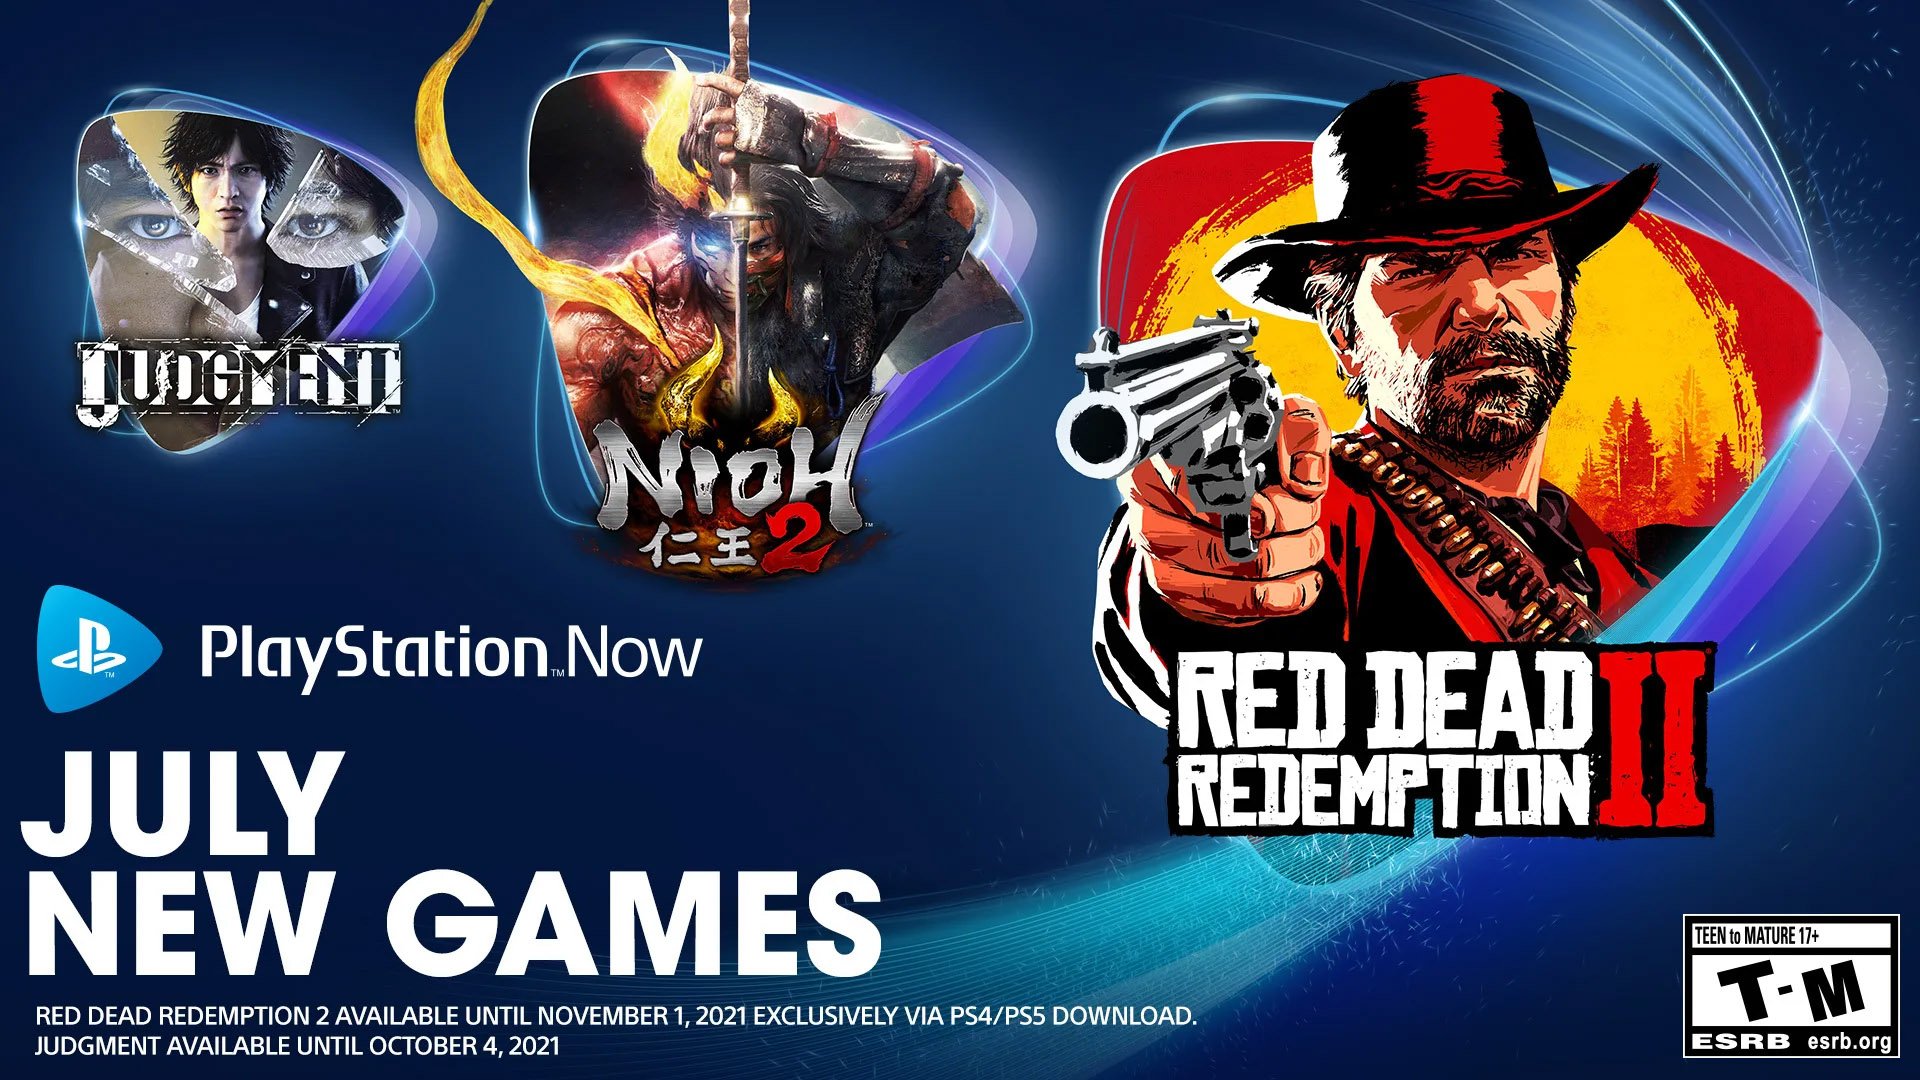 PlayStation Now adds God of War, Judgment, Nioh 2, Red Dead Redemption 2,  and more in July - Gematsu